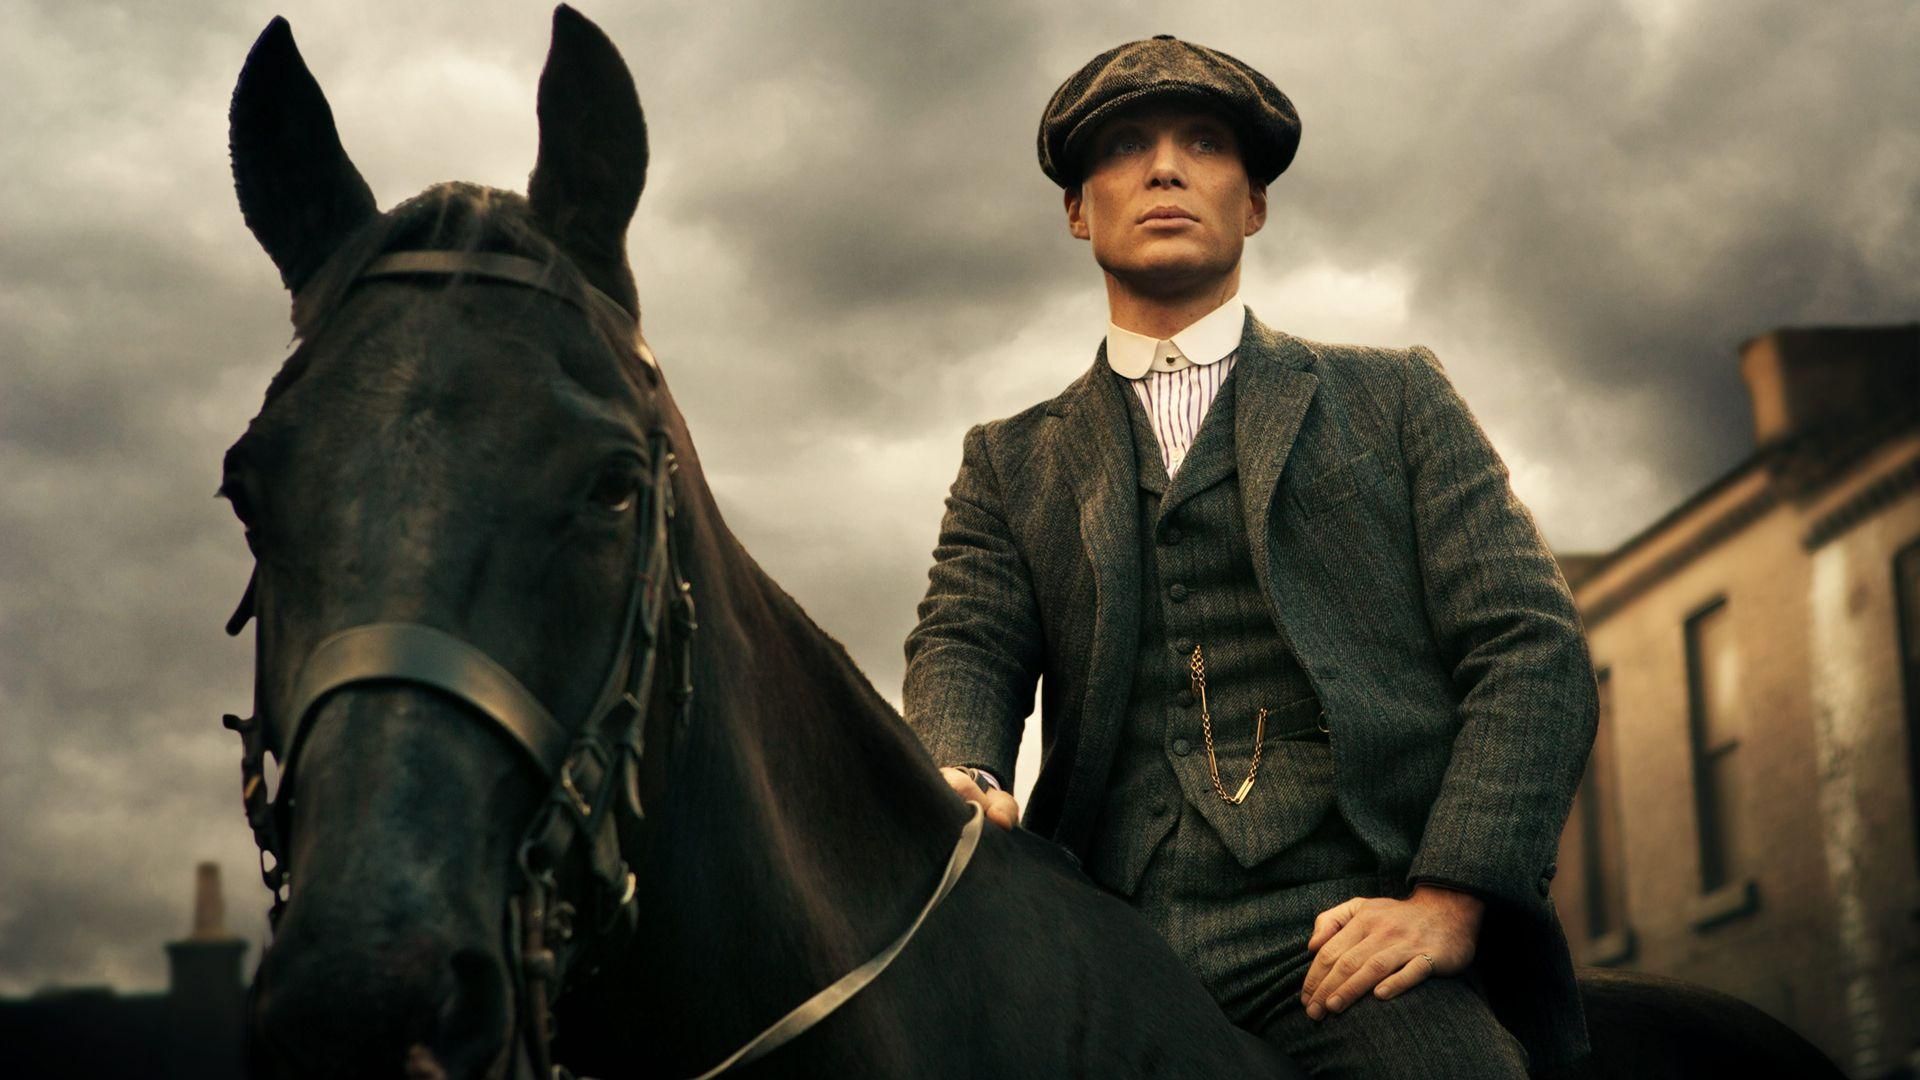 Cillian Murphy as Tommy Shelby on a horse in Peaky Blinders